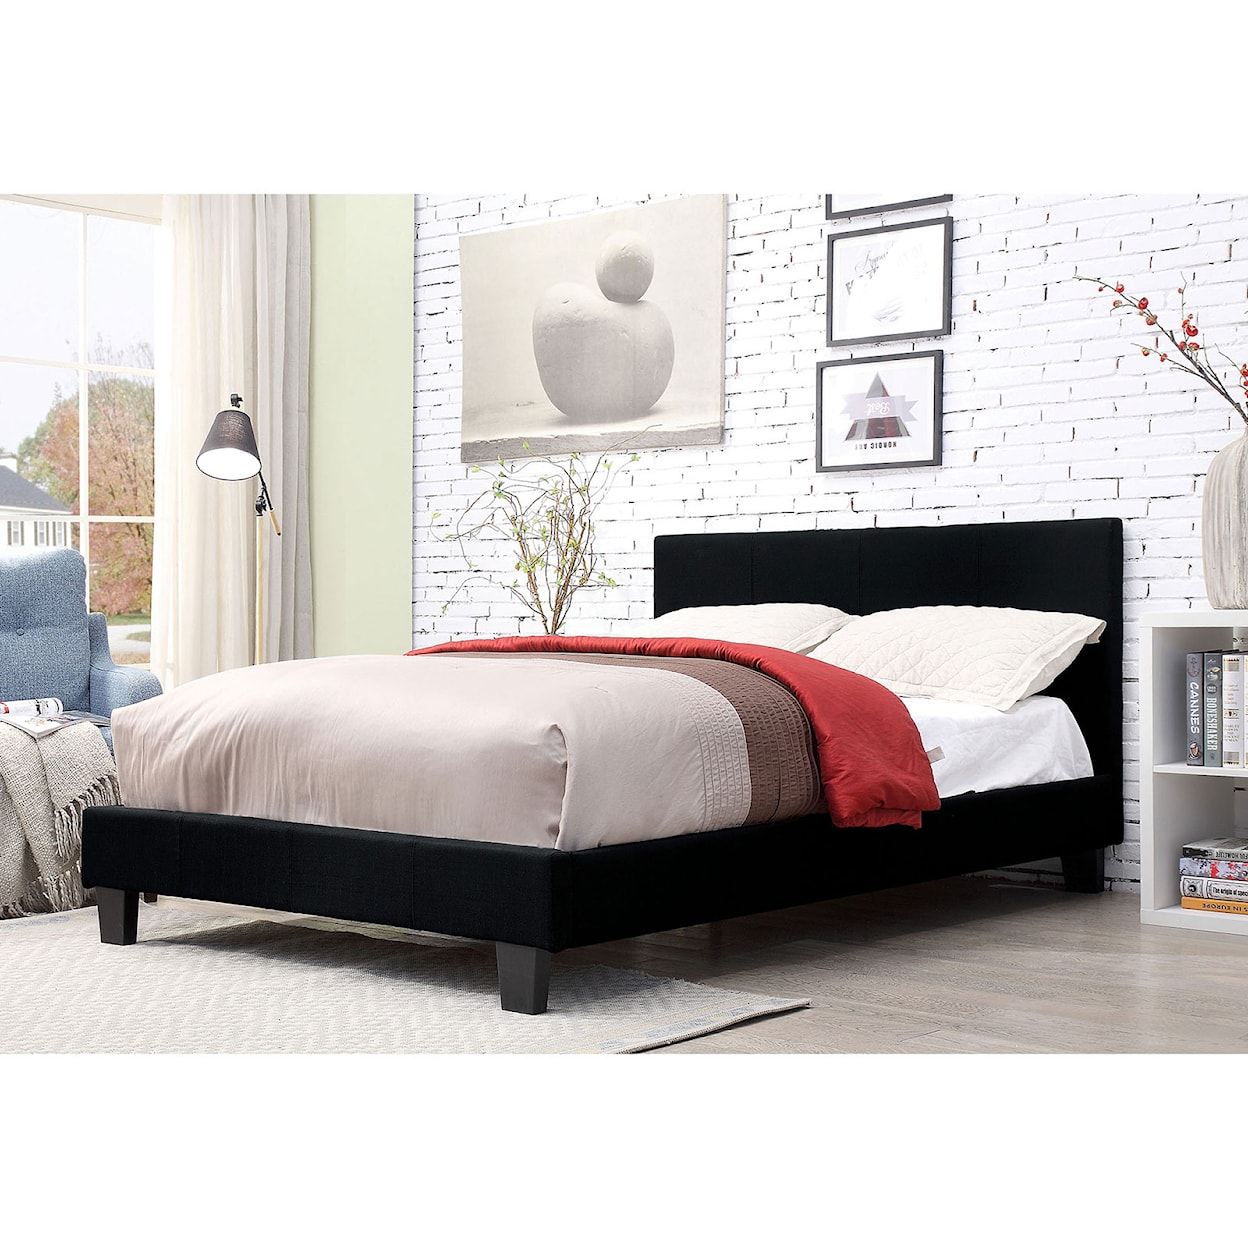 FUSA Sims Twin Bed